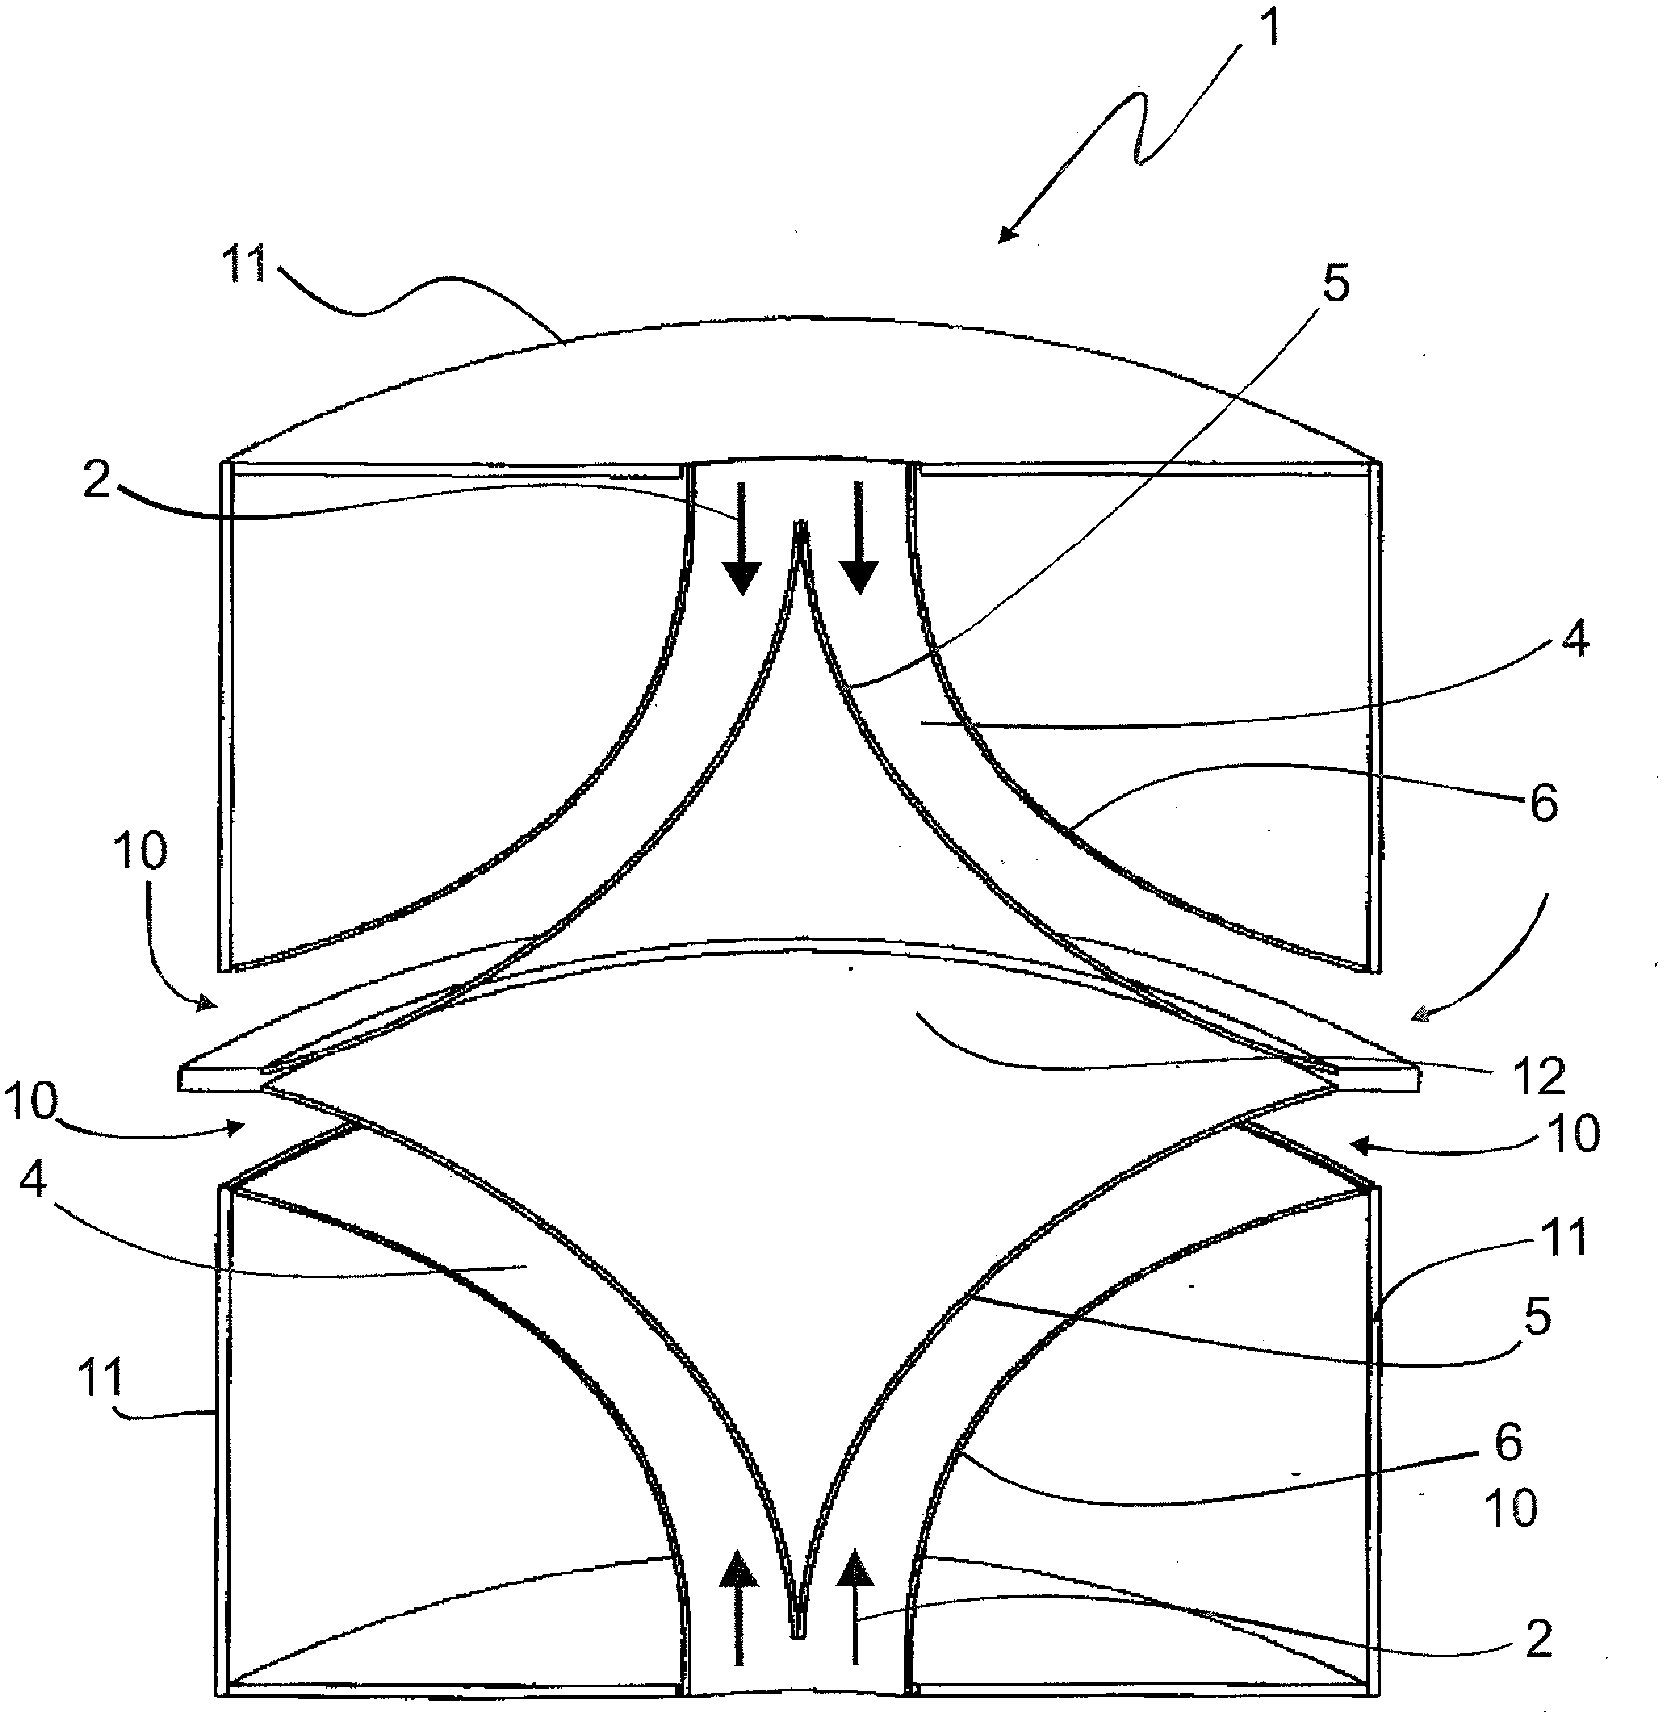 Loudspeaker apparatus with circumferential, funnel-like sound outlet opening